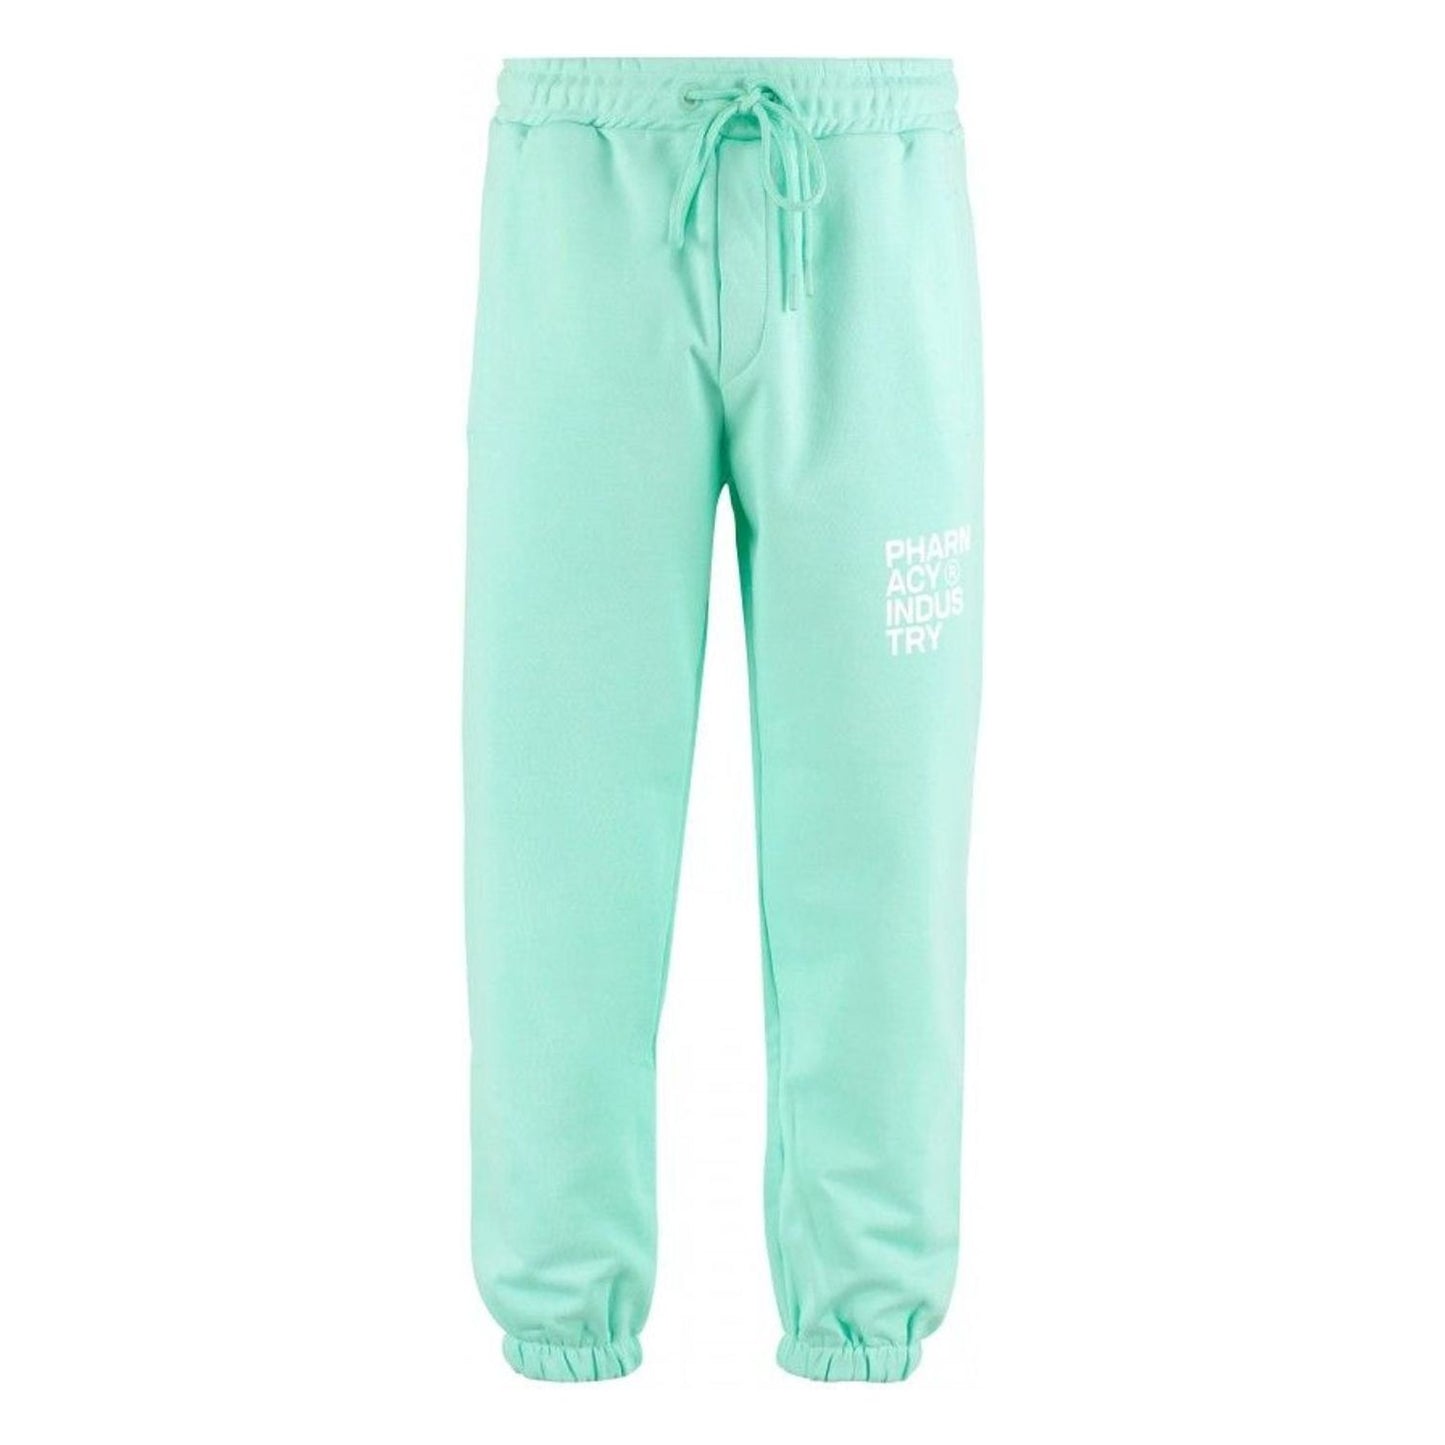 Pharmacy Industry Emerald Cotton Trousers with Logo Detail green-cotton-jeans-pant-2 product-8615-983260042-d73a4b2f-e8b.jpg